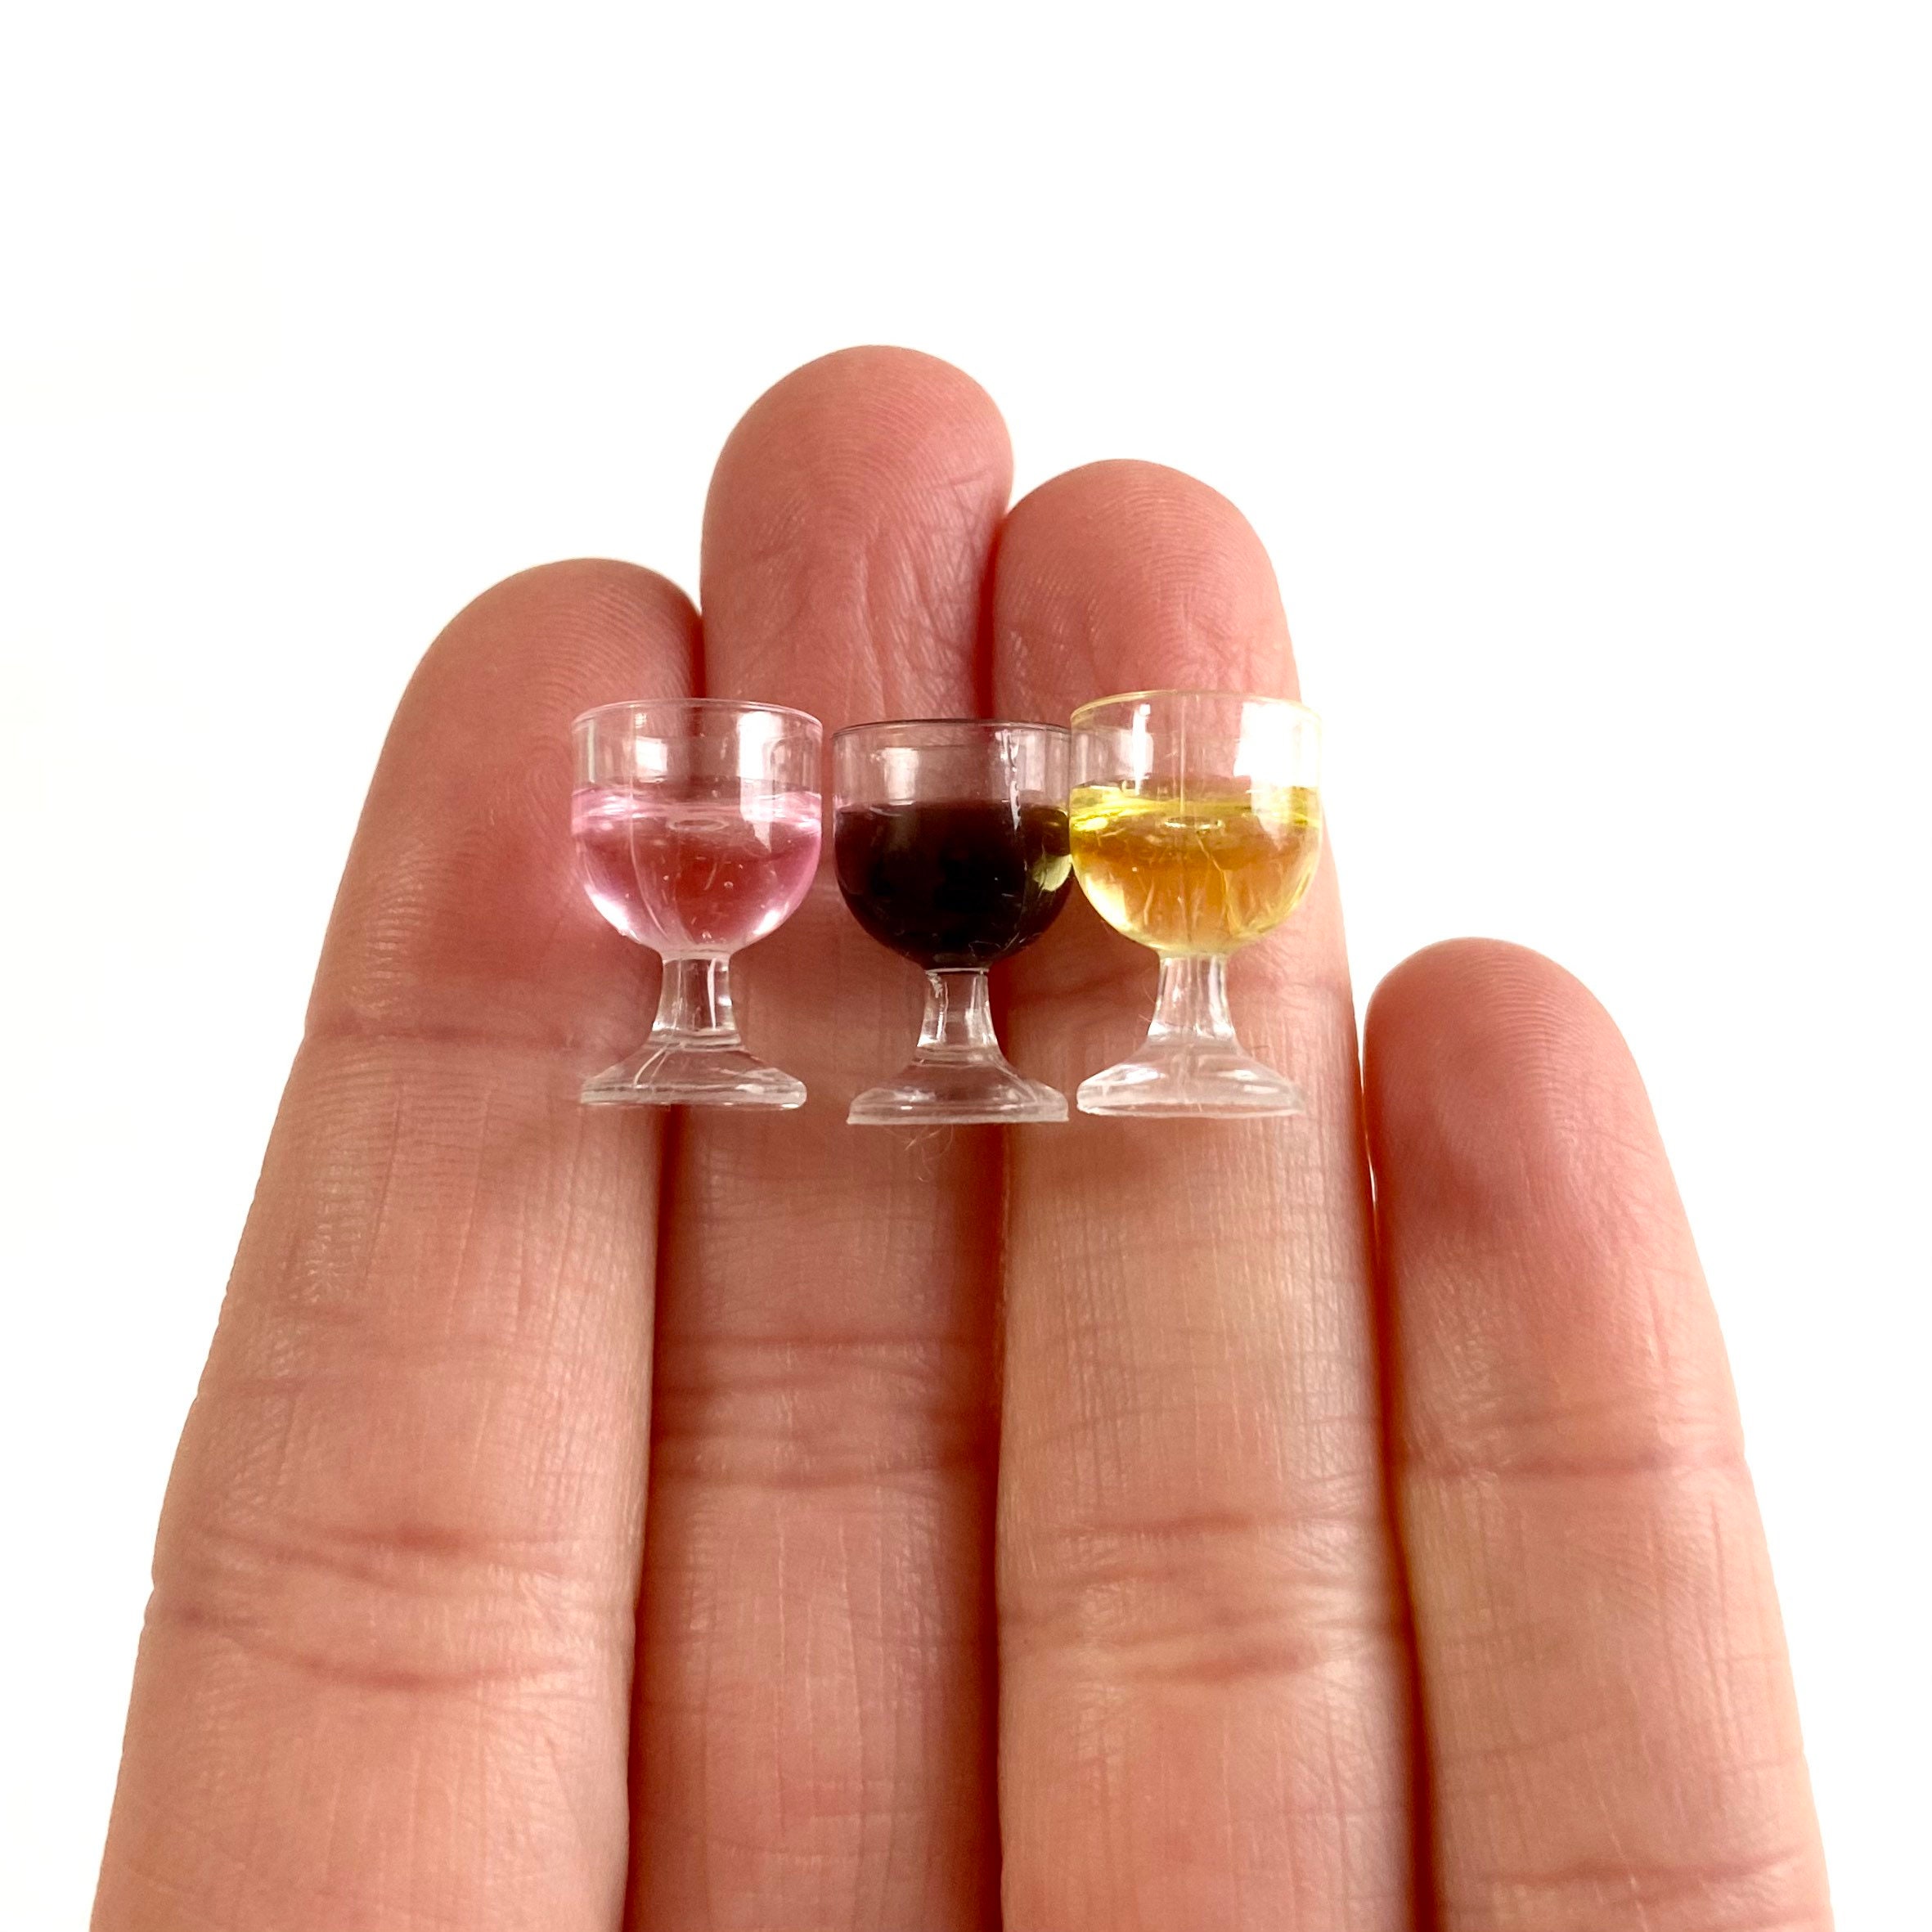 Miniature Kitchen Wine Glasses 1/12 Red White and Rose Resin Play Kitchen  Dolls Kitchenware UK Seller 